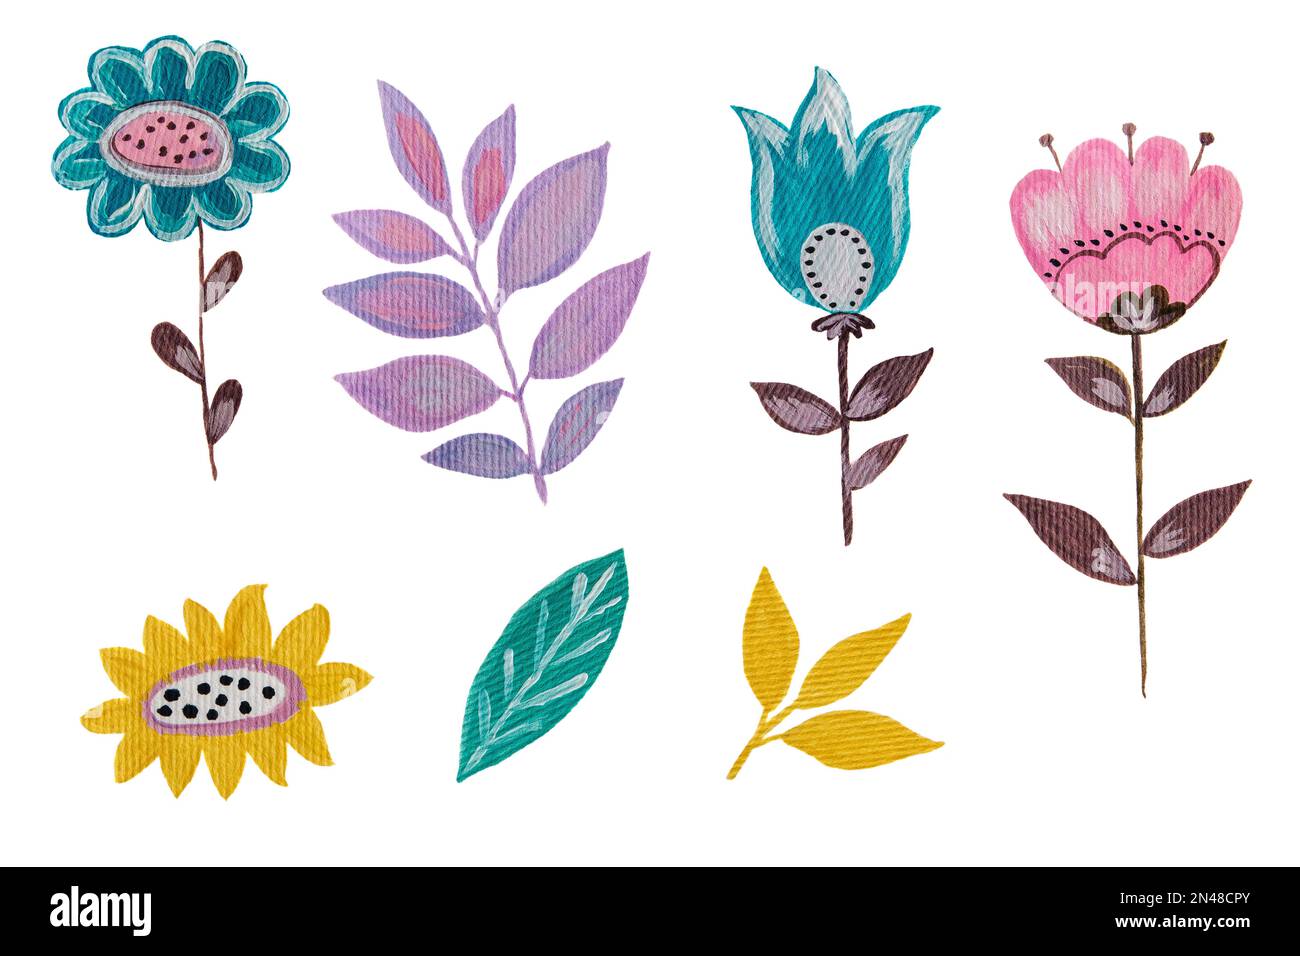 Flowers and leaves hand drawn elements. Illustration. Acrylic paints.Wrappers, wallpapers, postcards, greeting cards, wedding invitations, romantic ev Stock Photo